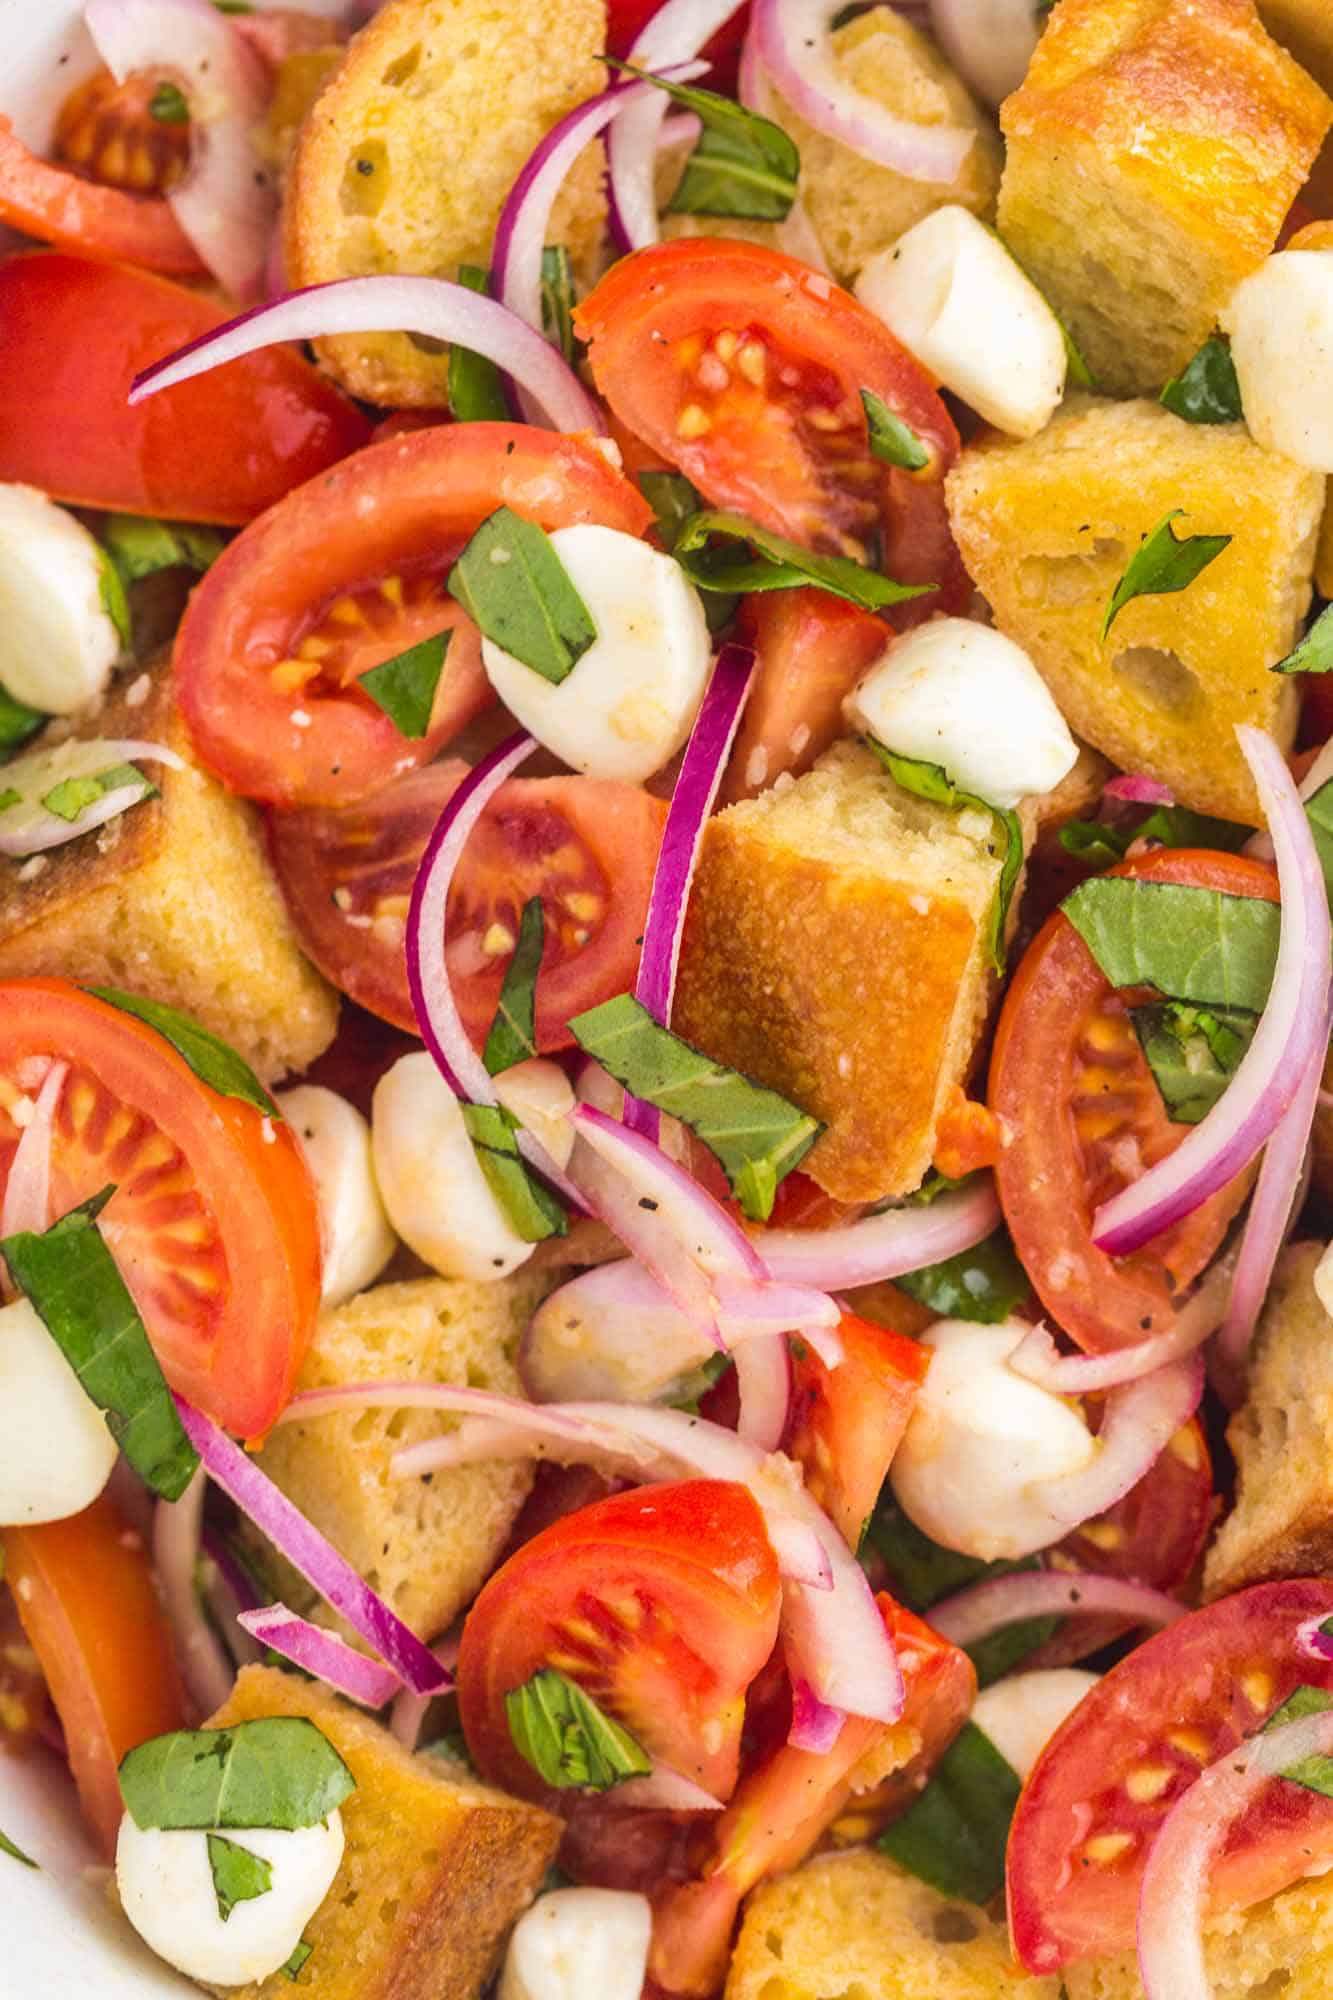 closeup image of panzanella salad with bread, tomatoes, onions, cheese, and herbs